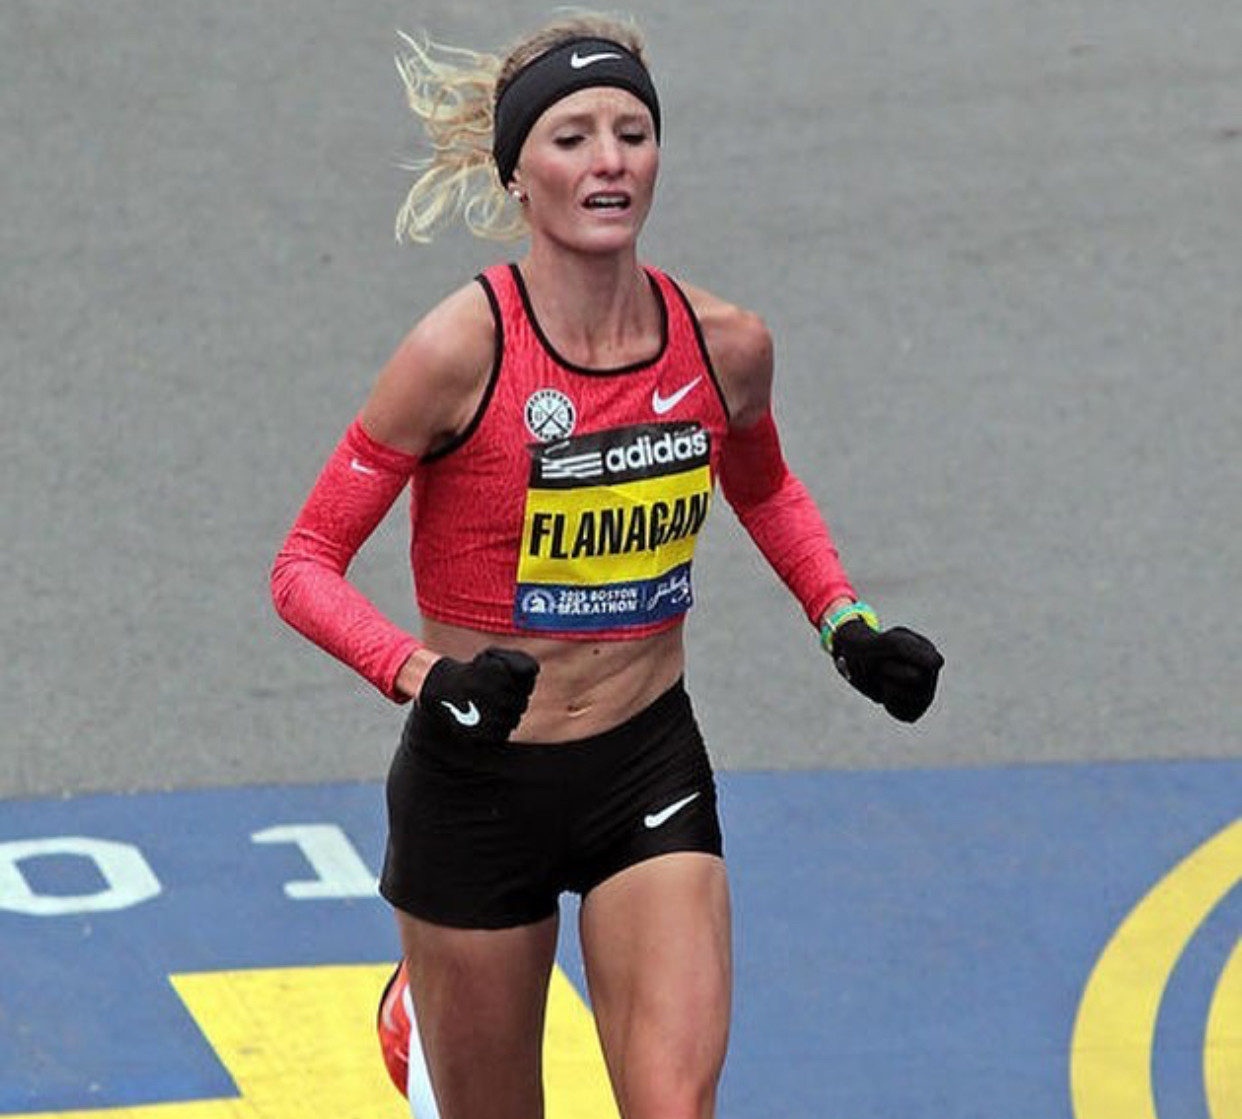 Shalane Flanagan message today is very clear - I have unfinished Business 